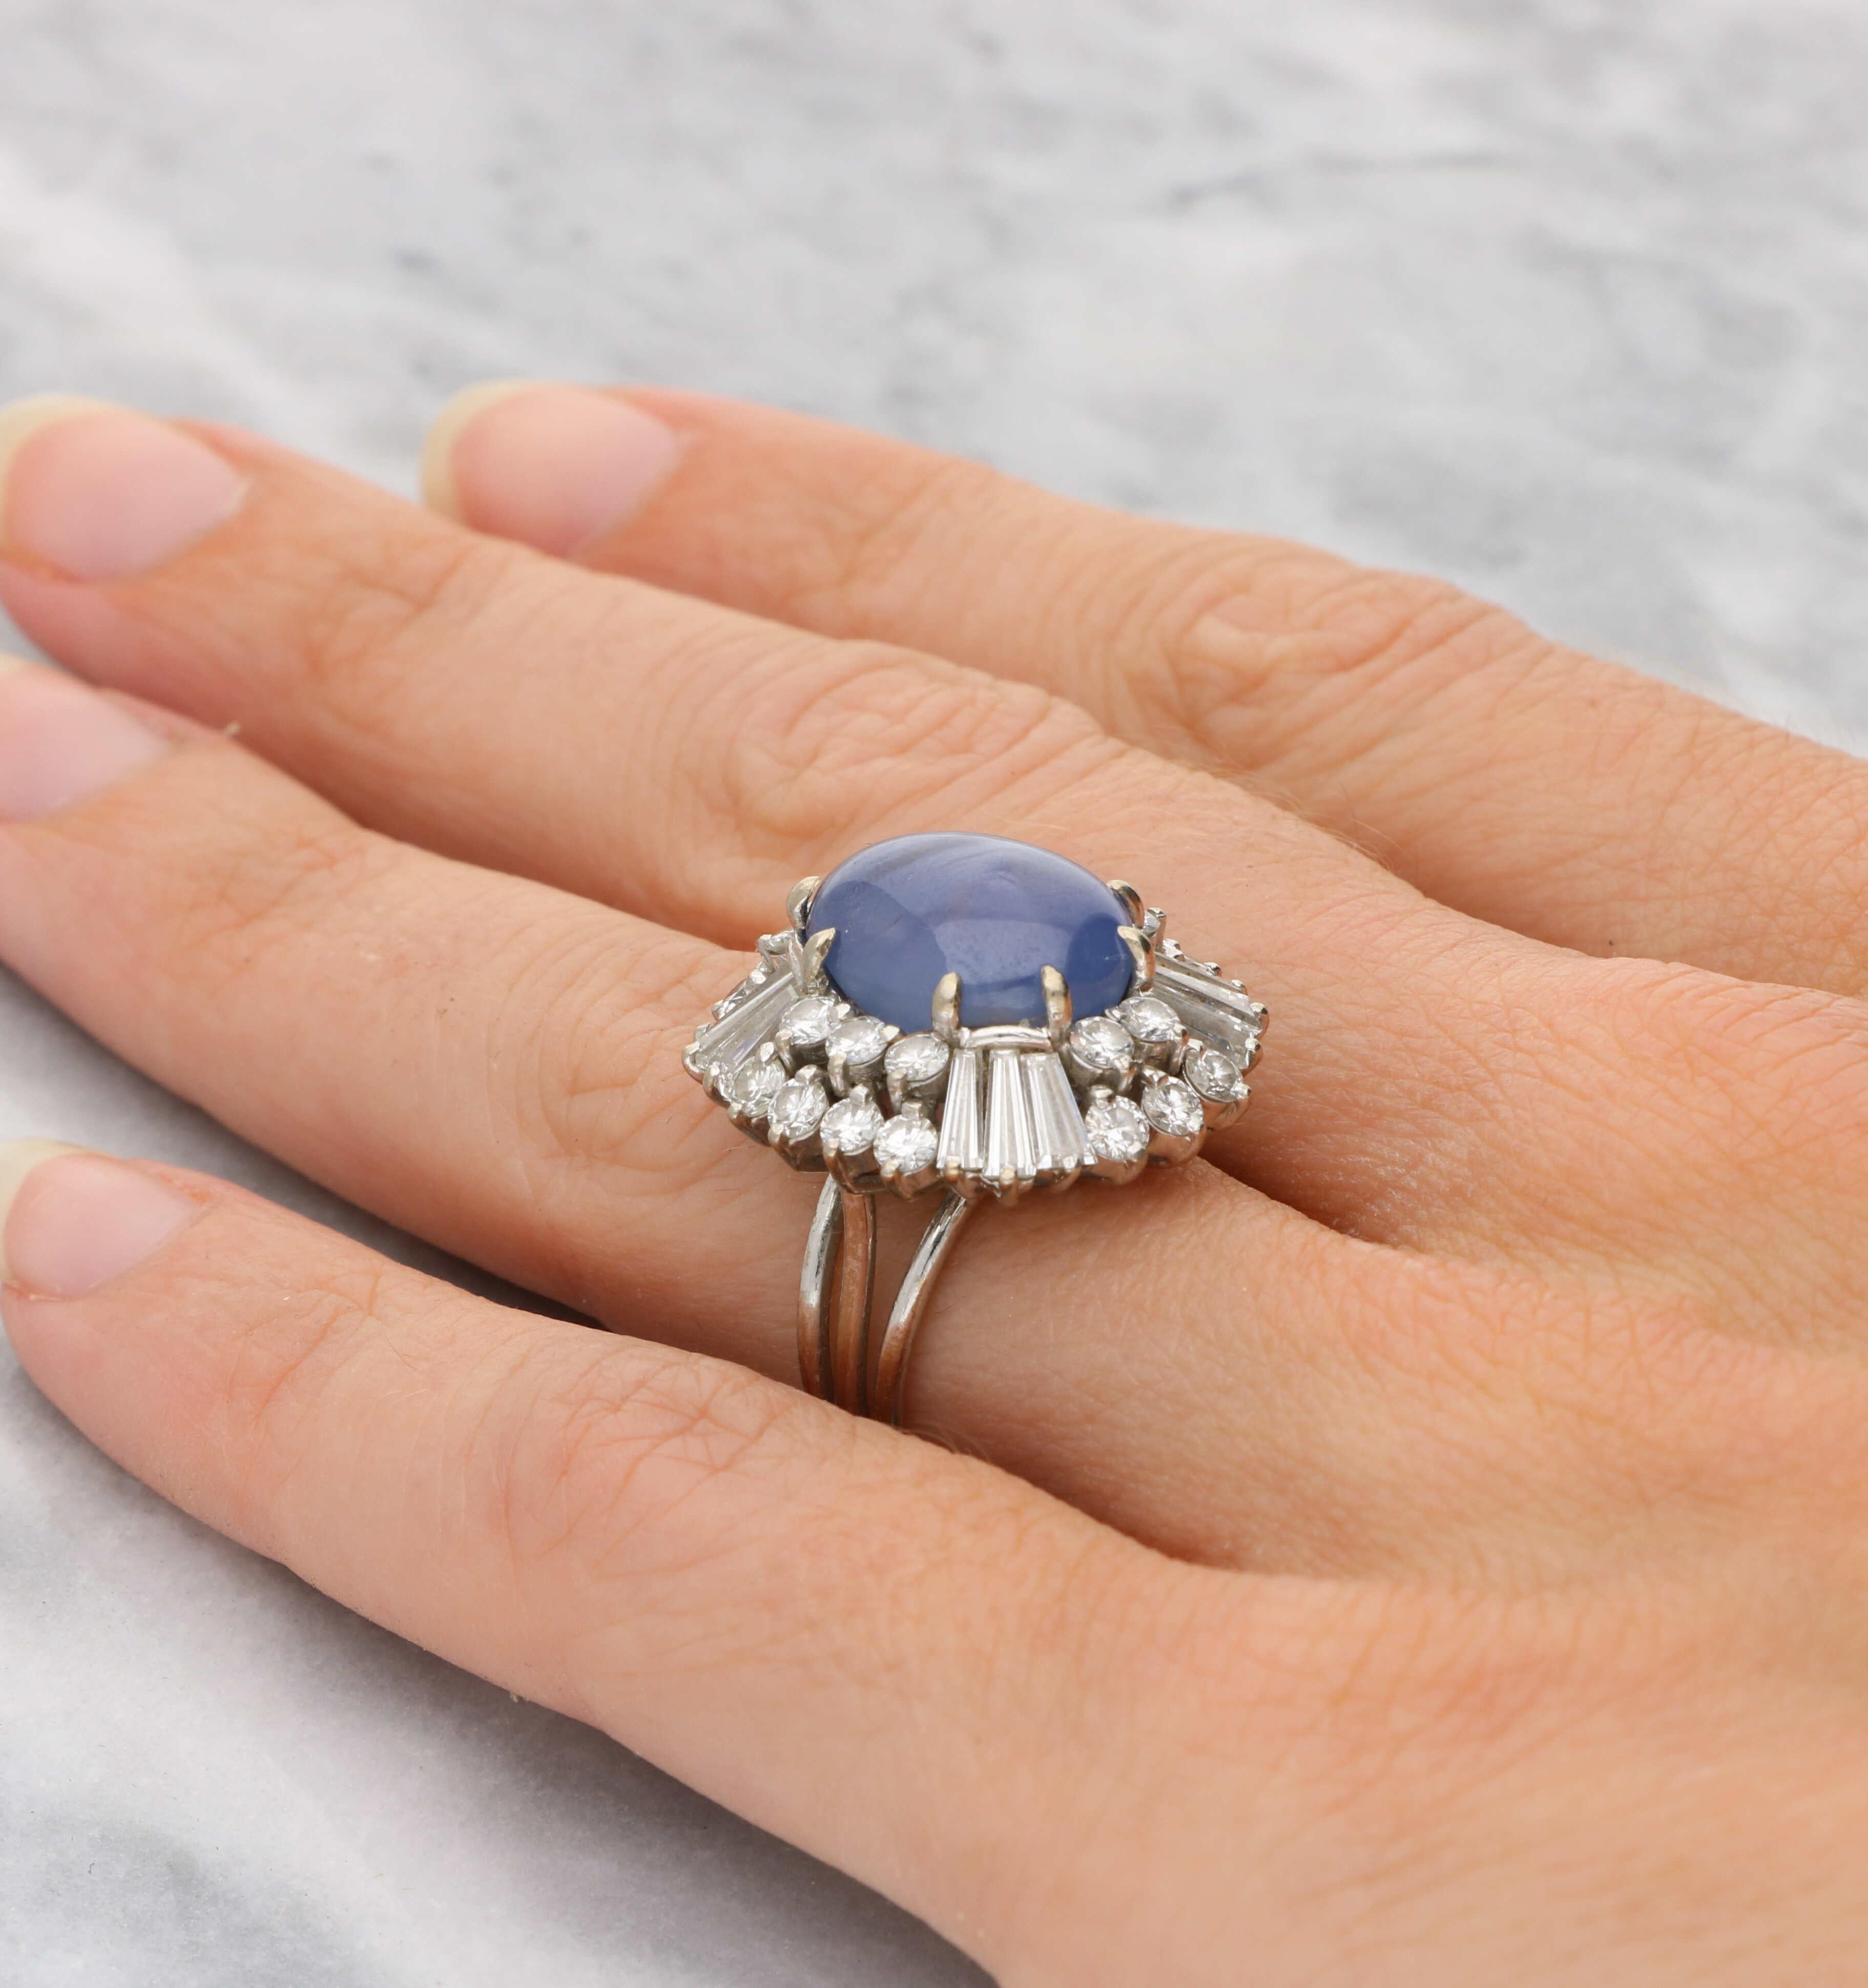 An 18ct white gold star sapphire and diamond cluster ring. The sapphire has an estimated weight of 12.00ct and is surrounded by 2.50ct of tapered baguette & round brilliant diamonds. The head of the ring measures 23x21mm and is a UK size L / US size